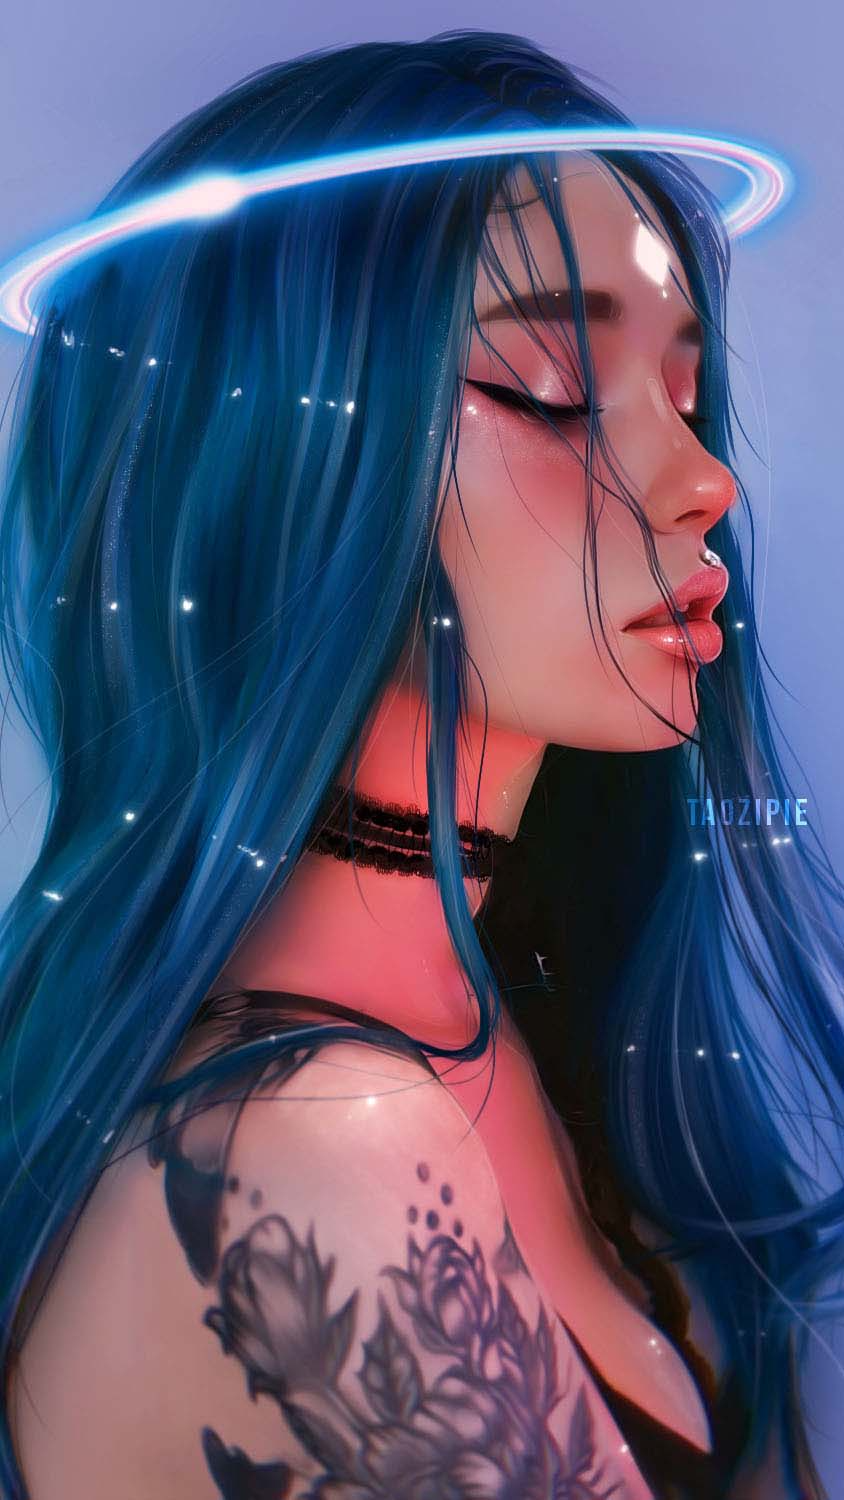 Blue Hairs Tattoo Girl IPhone Wallpaper HD  IPhone Wallpapers